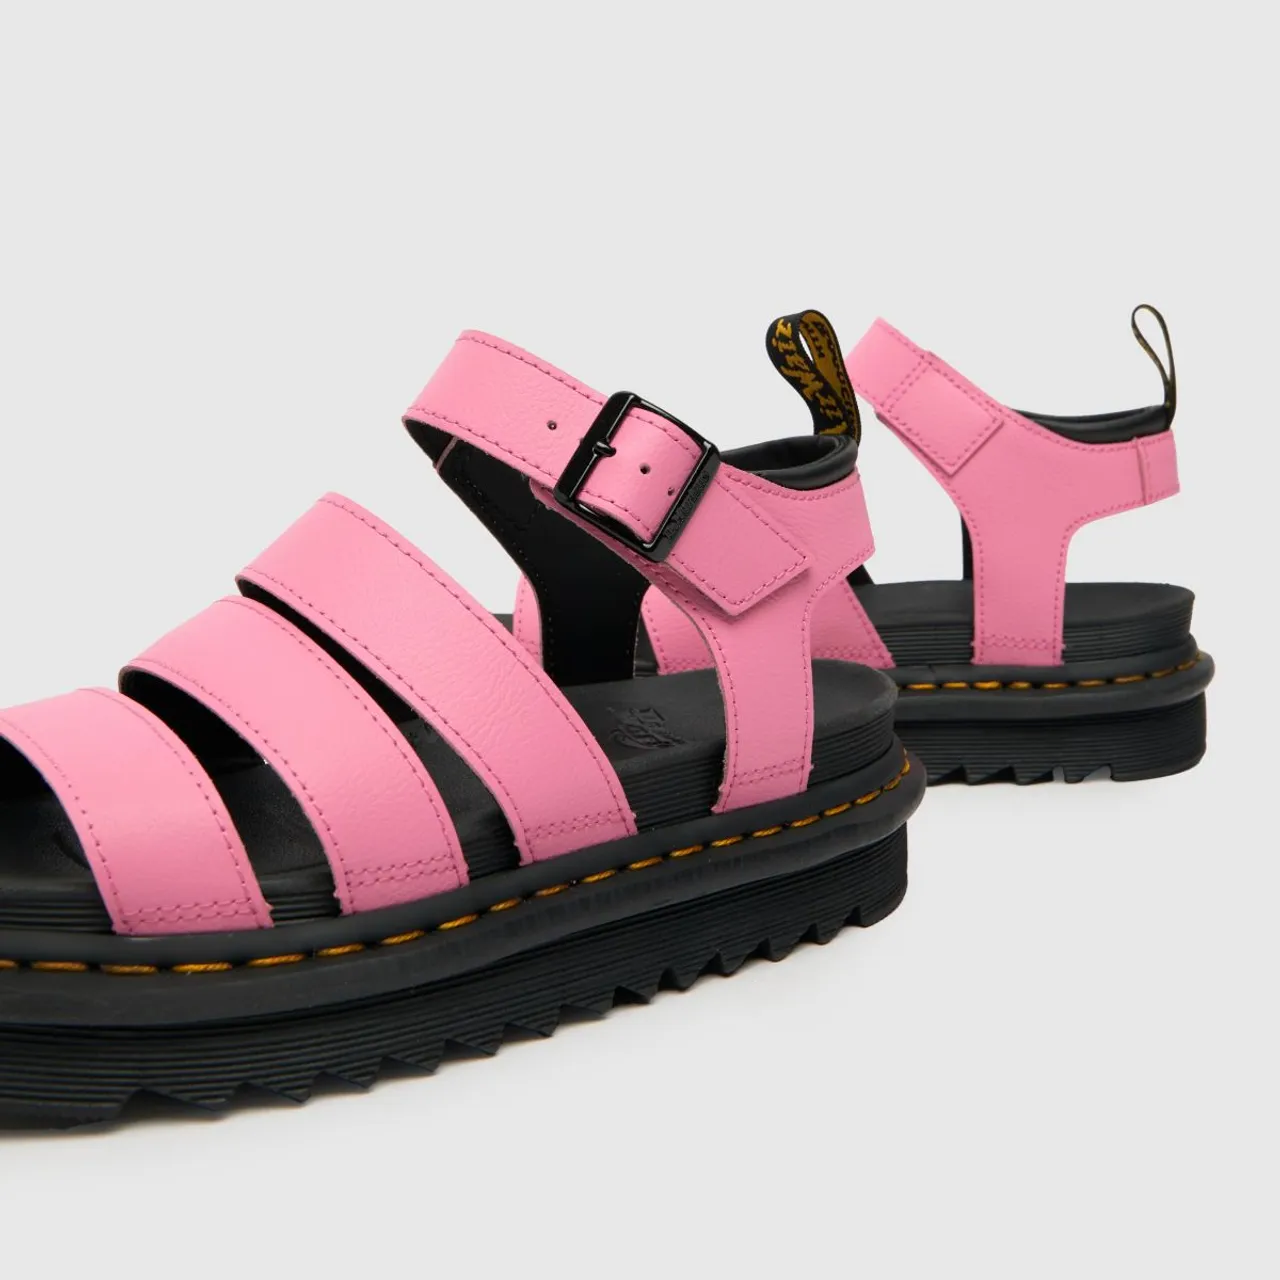 Dr Martens Blaire Sandals in Pink